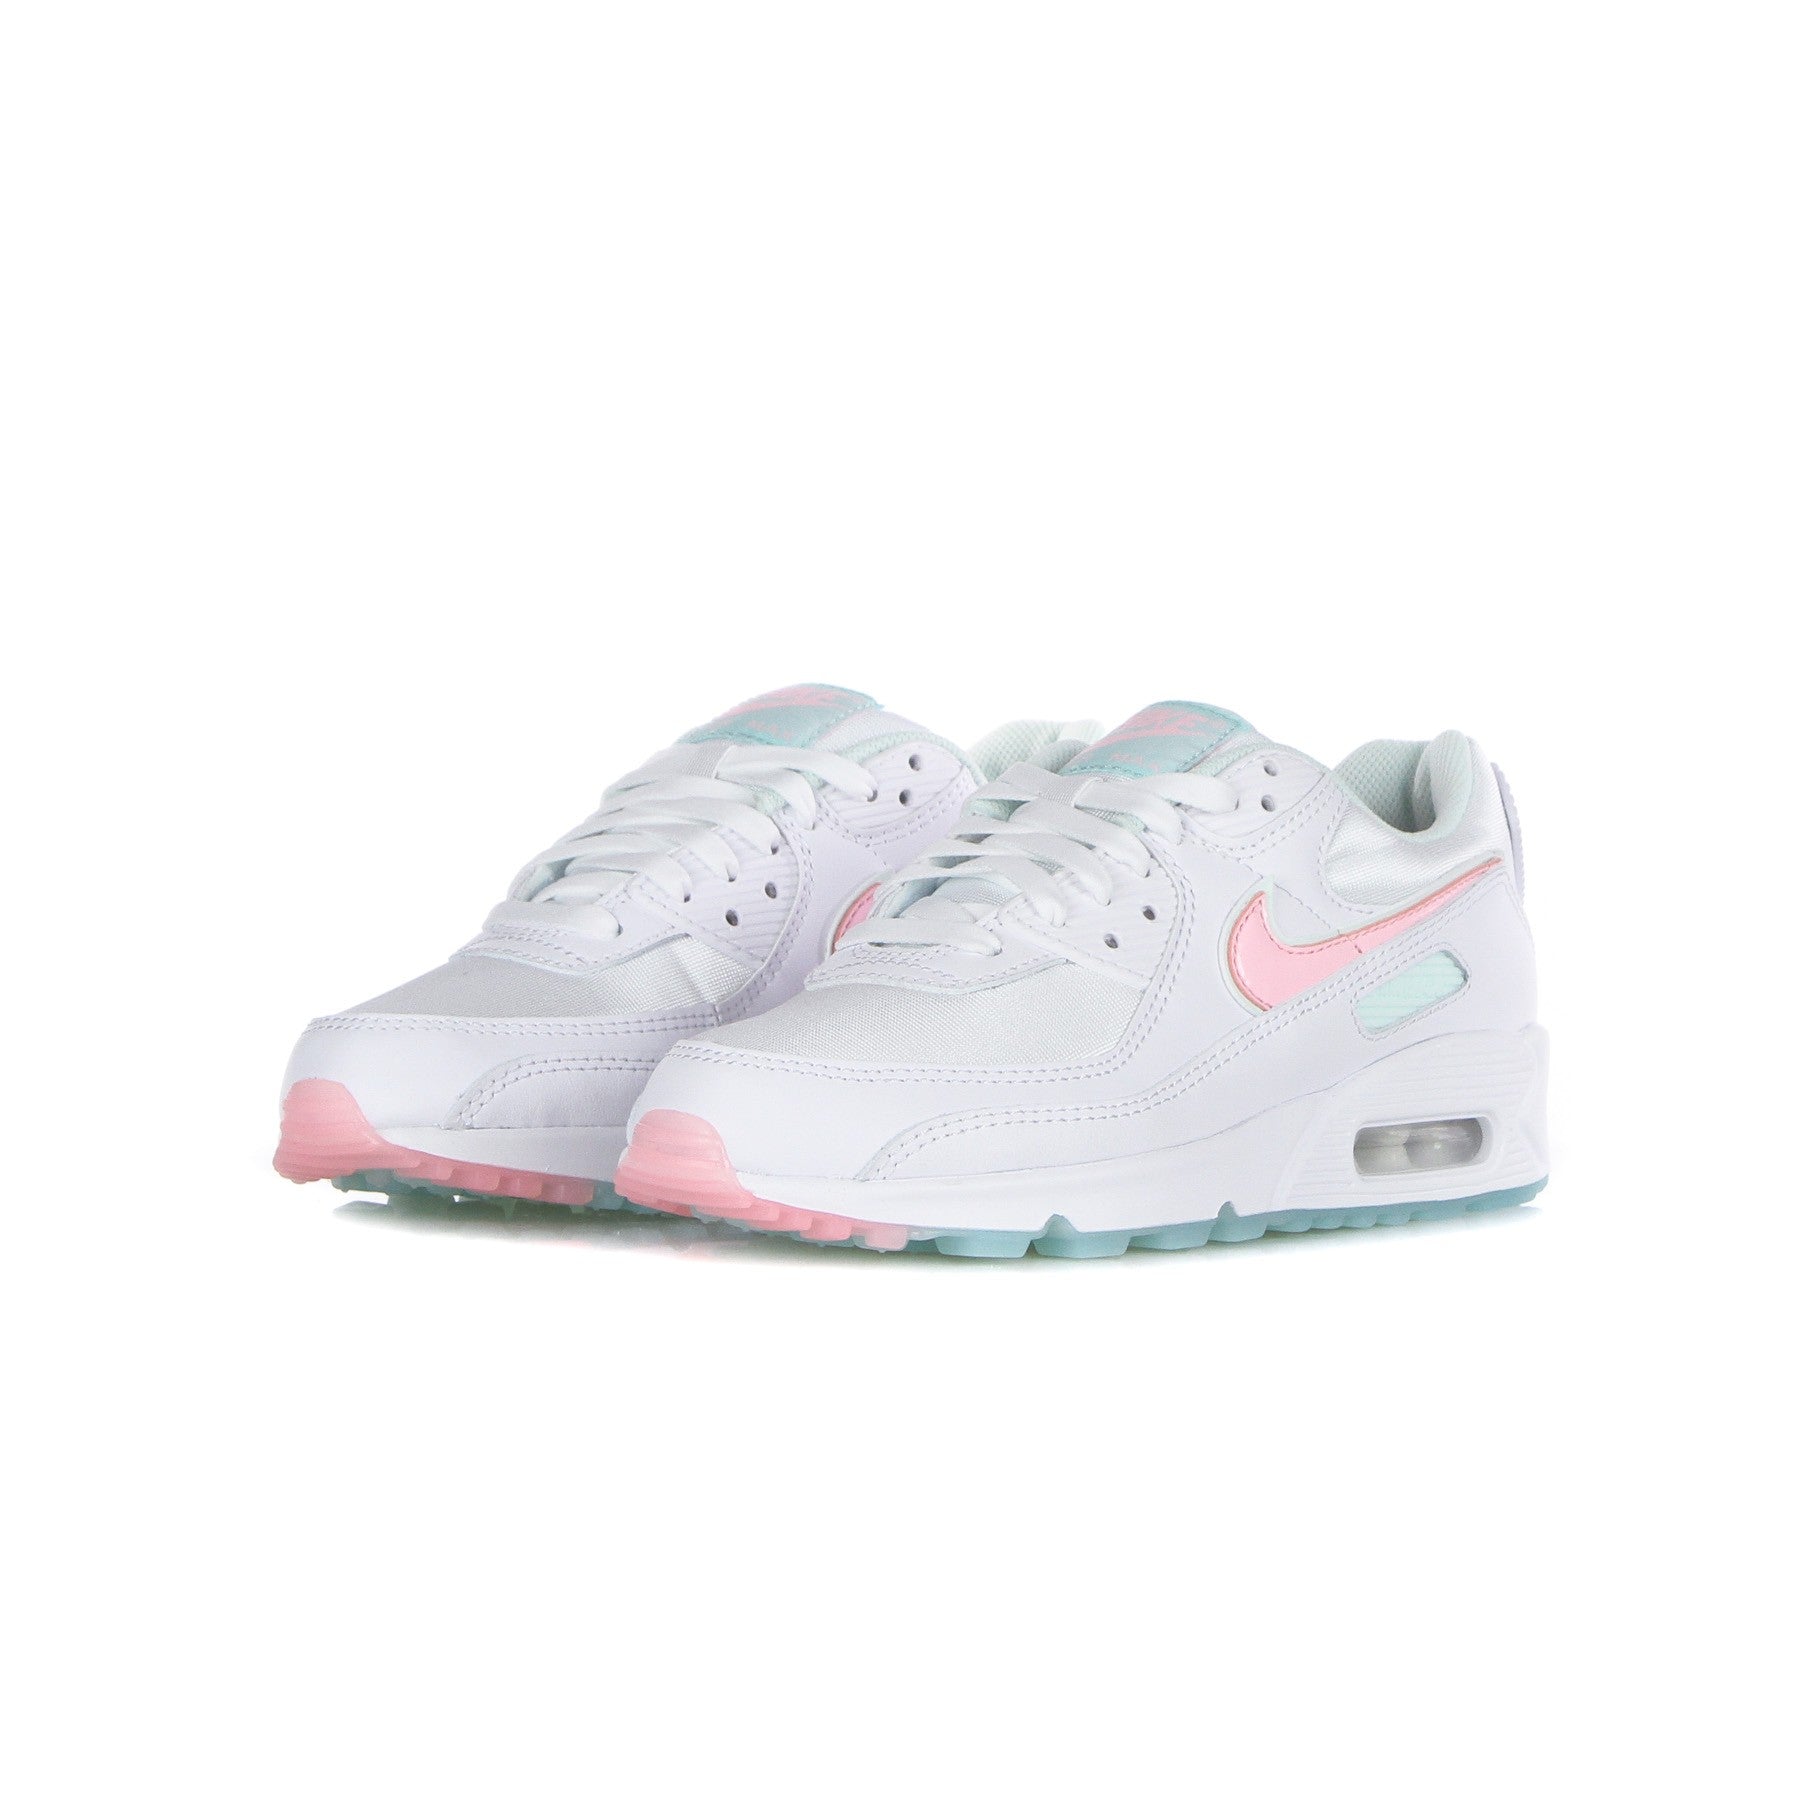 W Air Max 90 White/arctic Punch/barely Green Women's Low Shoe